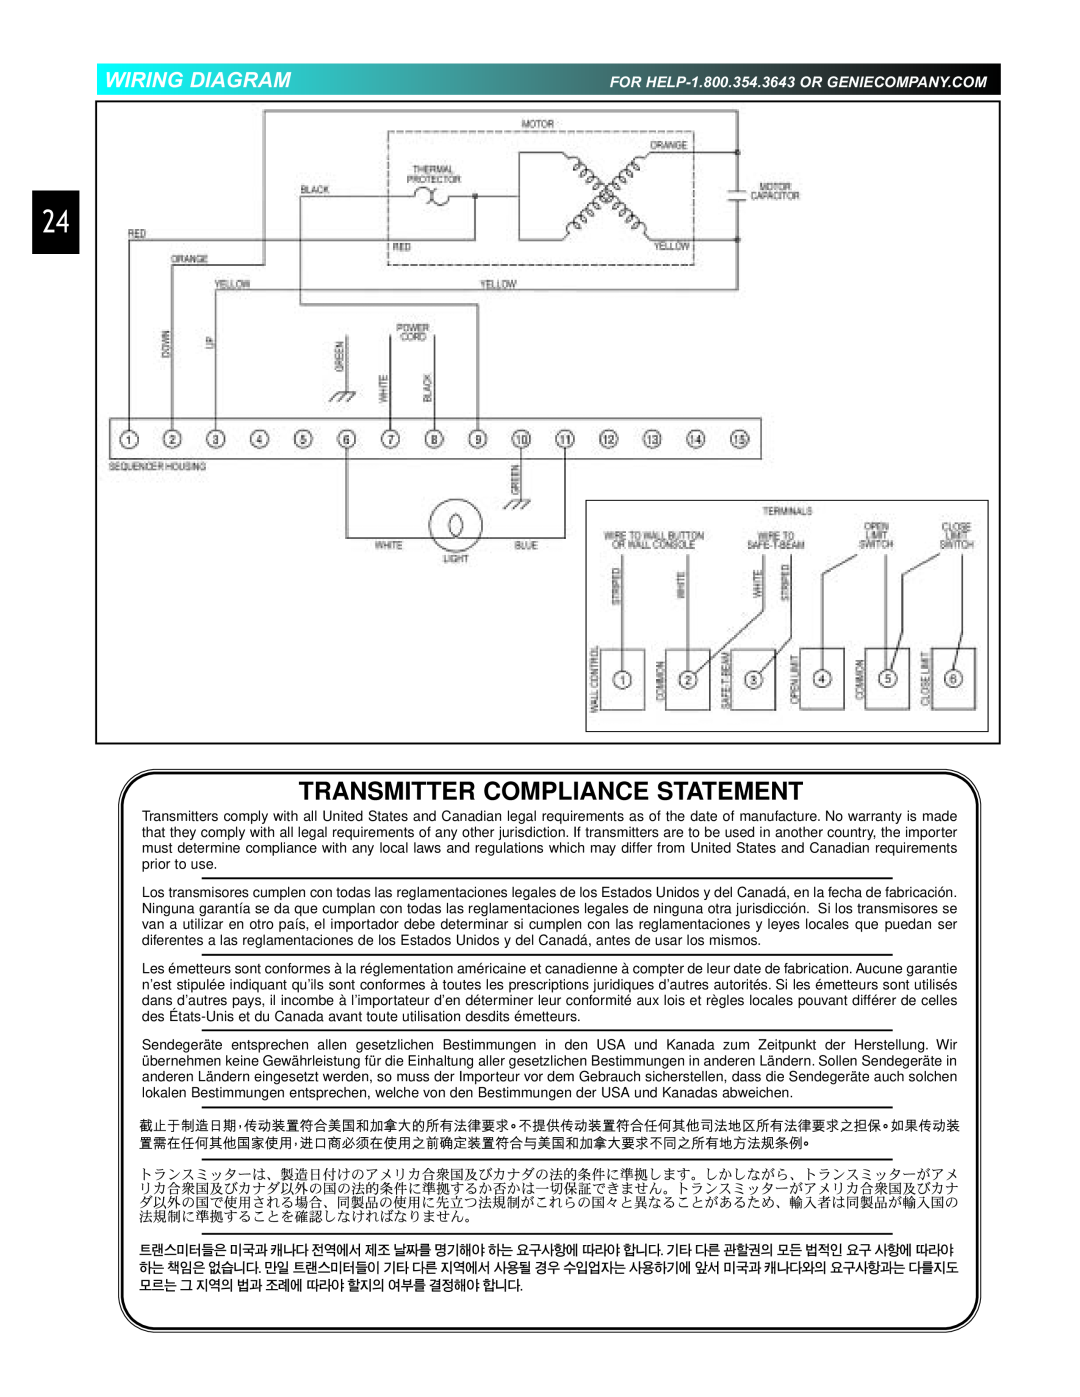 Genie 3452535556 PCG manual Wiring Diagram, Transmitter Compliance Statement, FOR HELP-1.800.354.3643 OR GENIECOMPANY.COM 